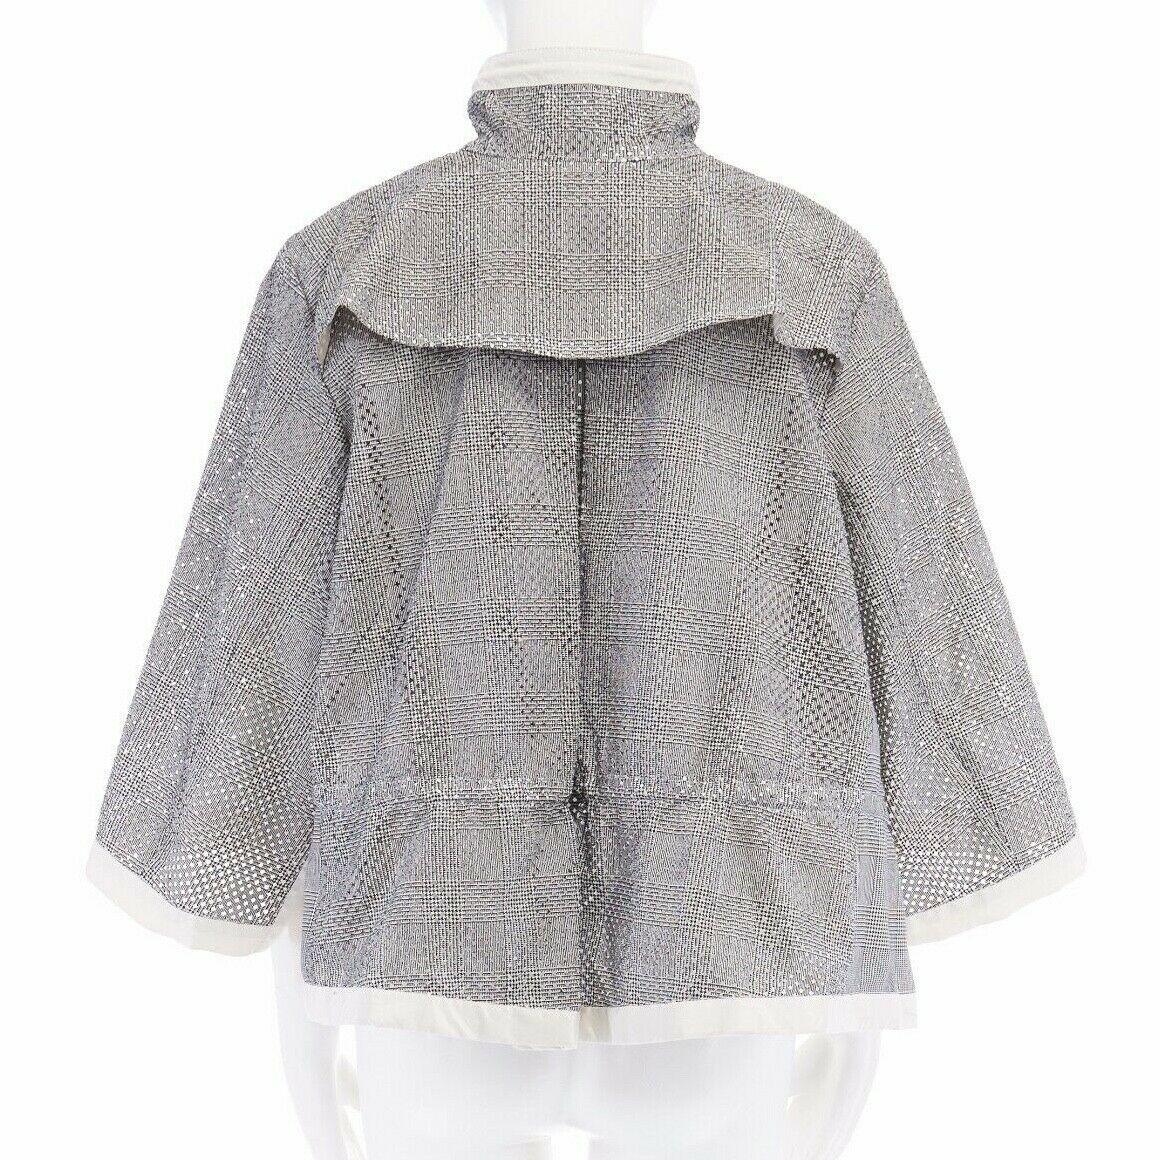 runway SACAI SS14 grey prince of wales perforated flared back swing jacket JP1
SACAI BY CHITOSE ABE
FROM THE SPRING SUMMER 2014 COLLECTION
Cotton, polyester, cupro. Grey Prince of Wales checked. 
Perforated holes along sleeve and hem. High collar.